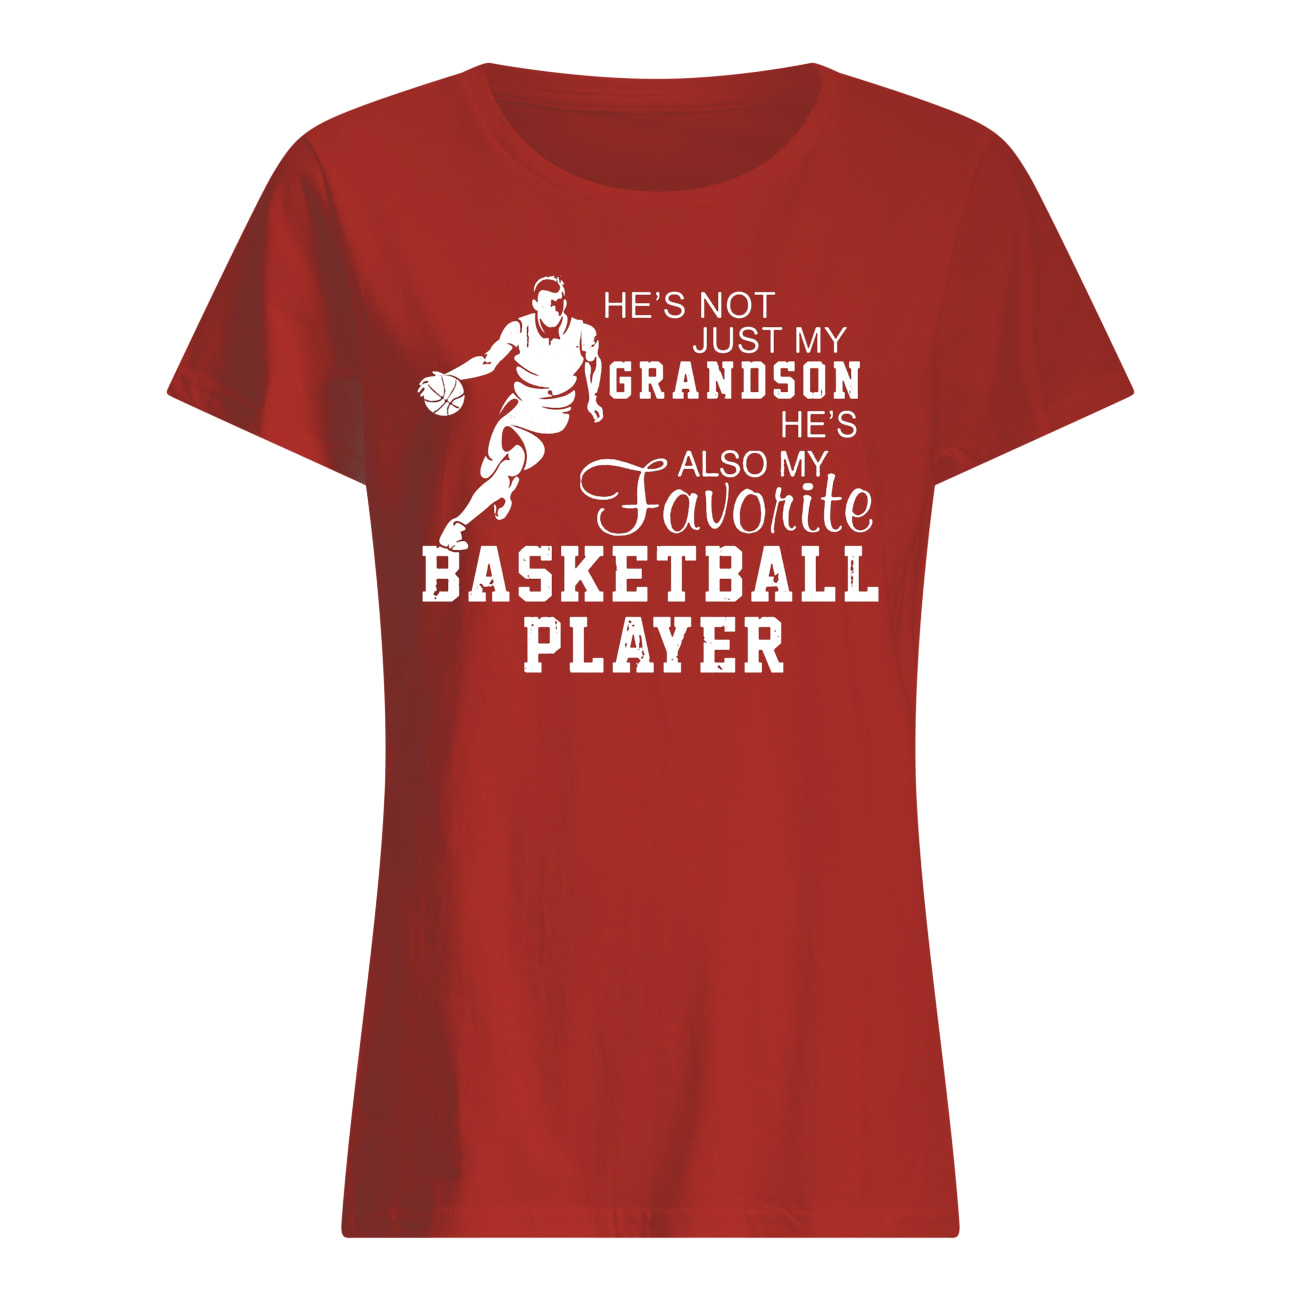 He's not just my grandson he's also my favorite basketball player womens shirt